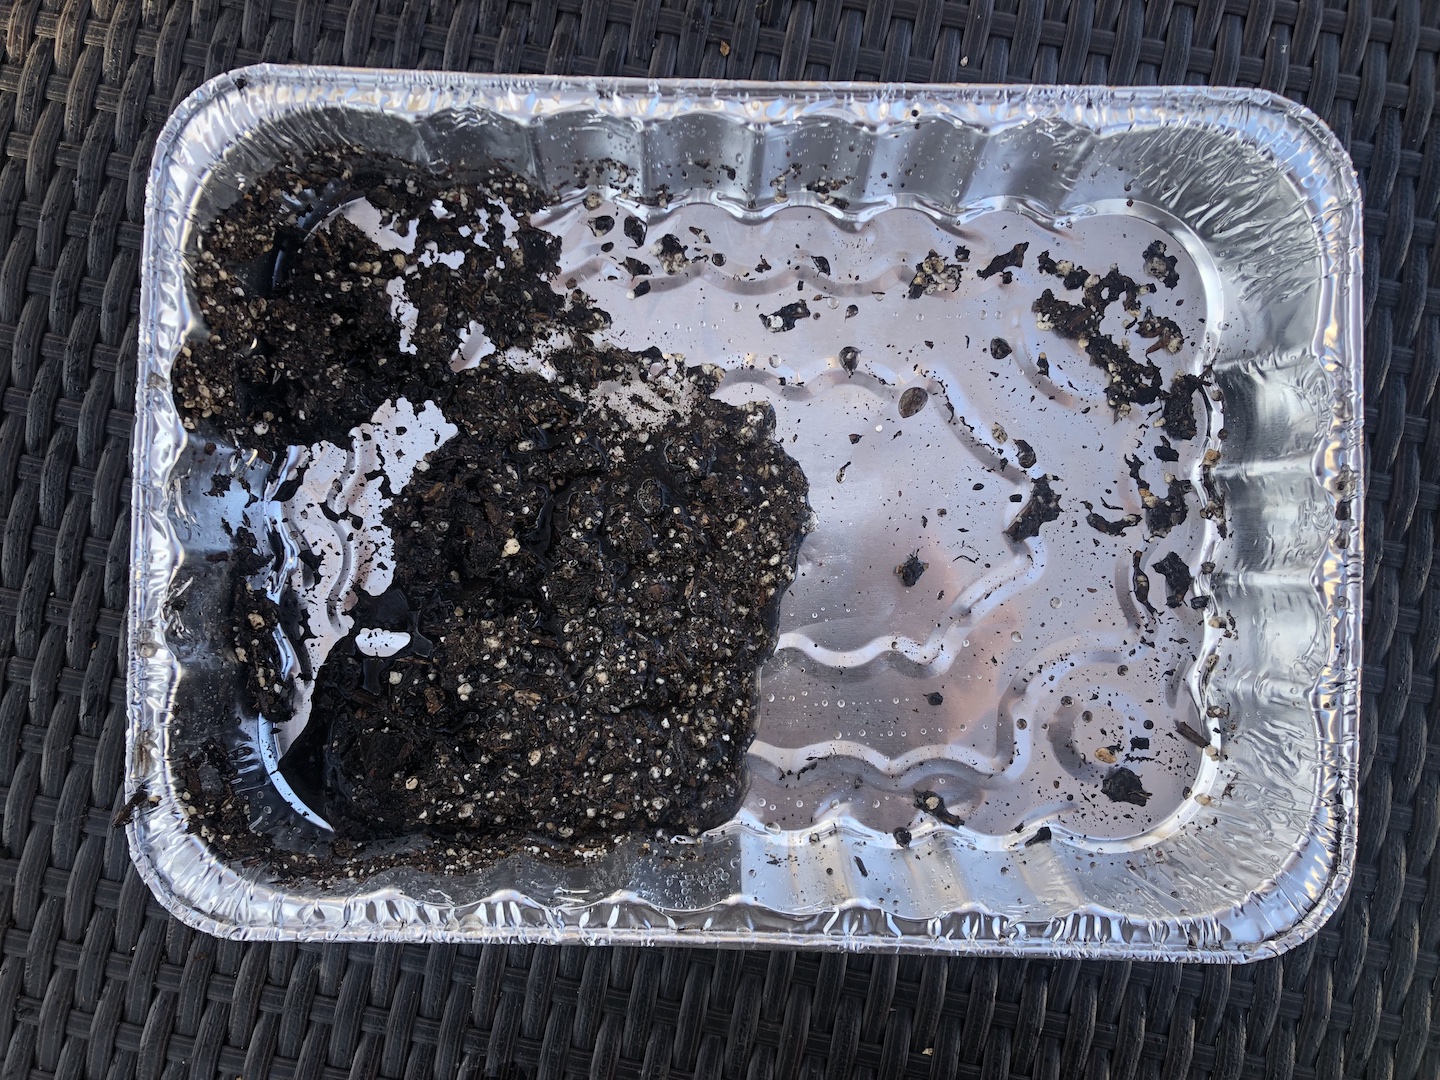 Cake pan with water drained out but soil remaining